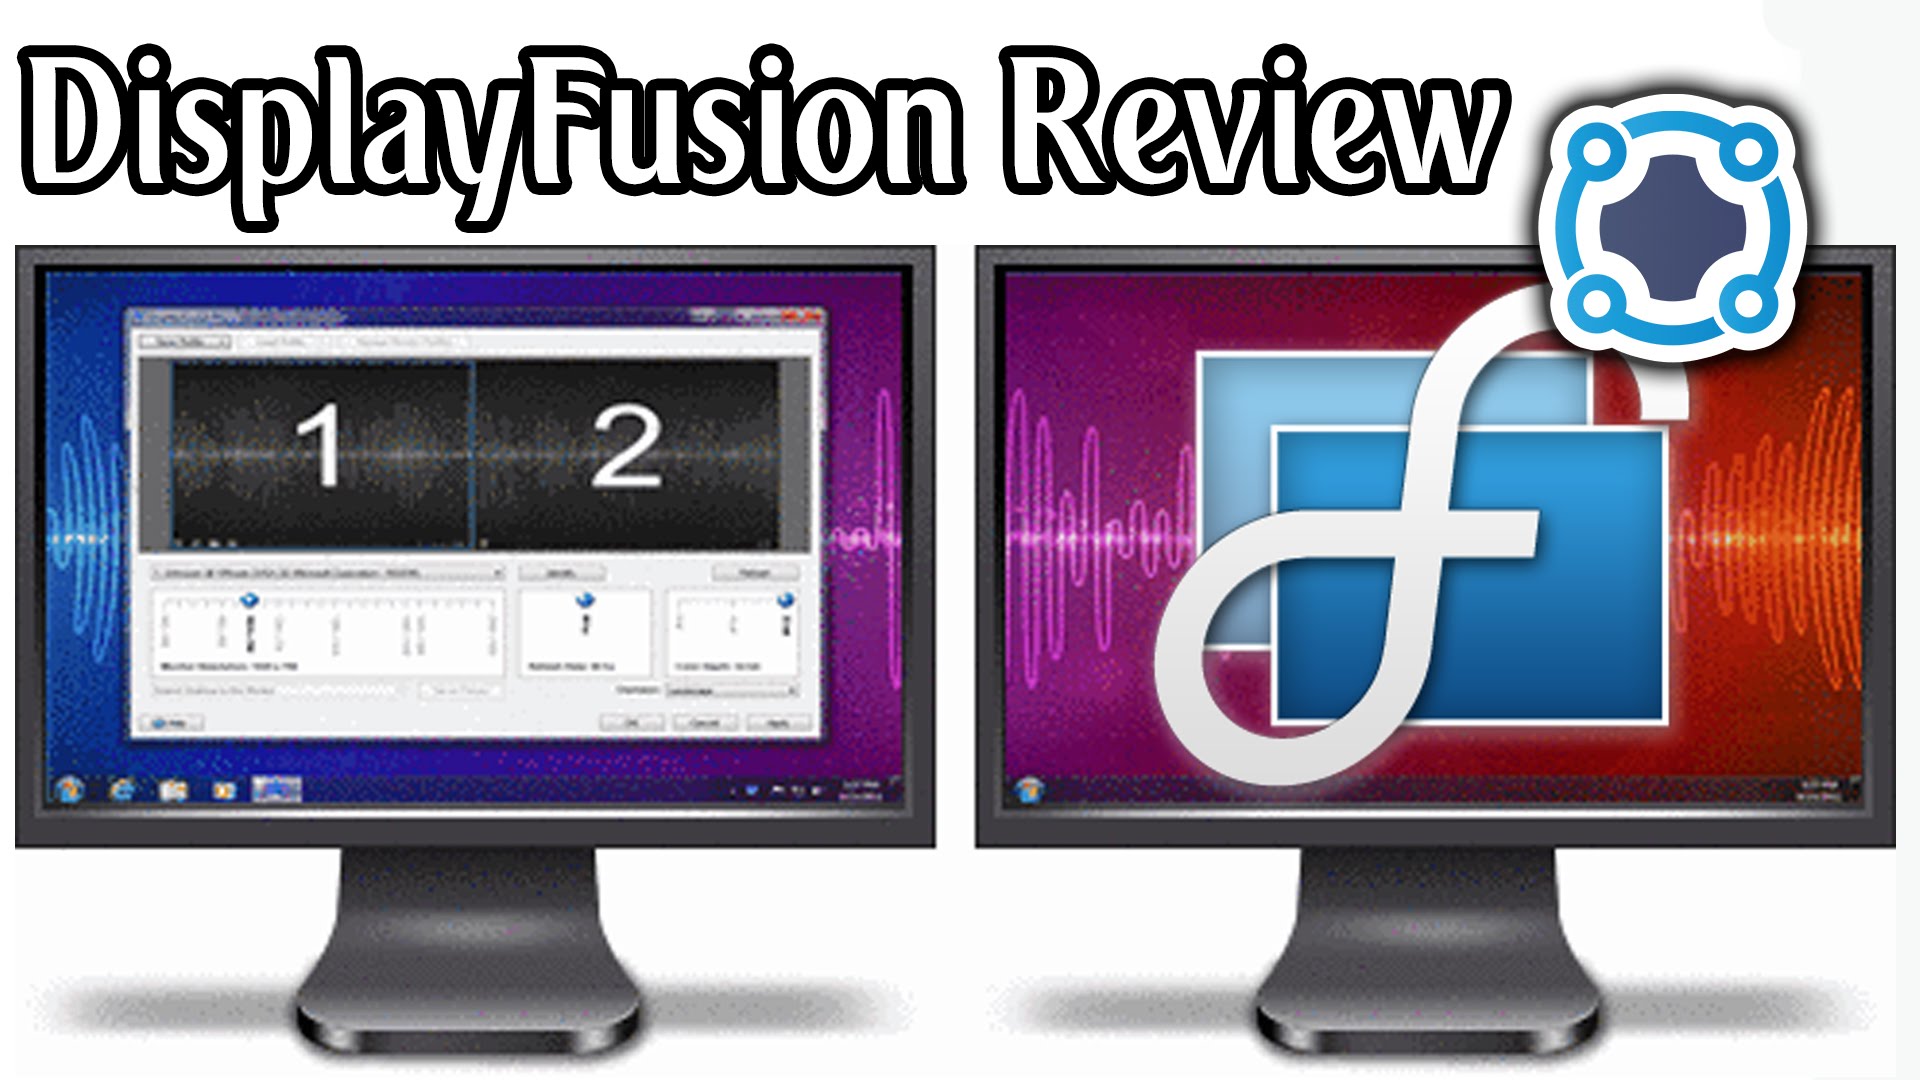 Review - DisplayFusion: Multiple Monitors Made Easy!